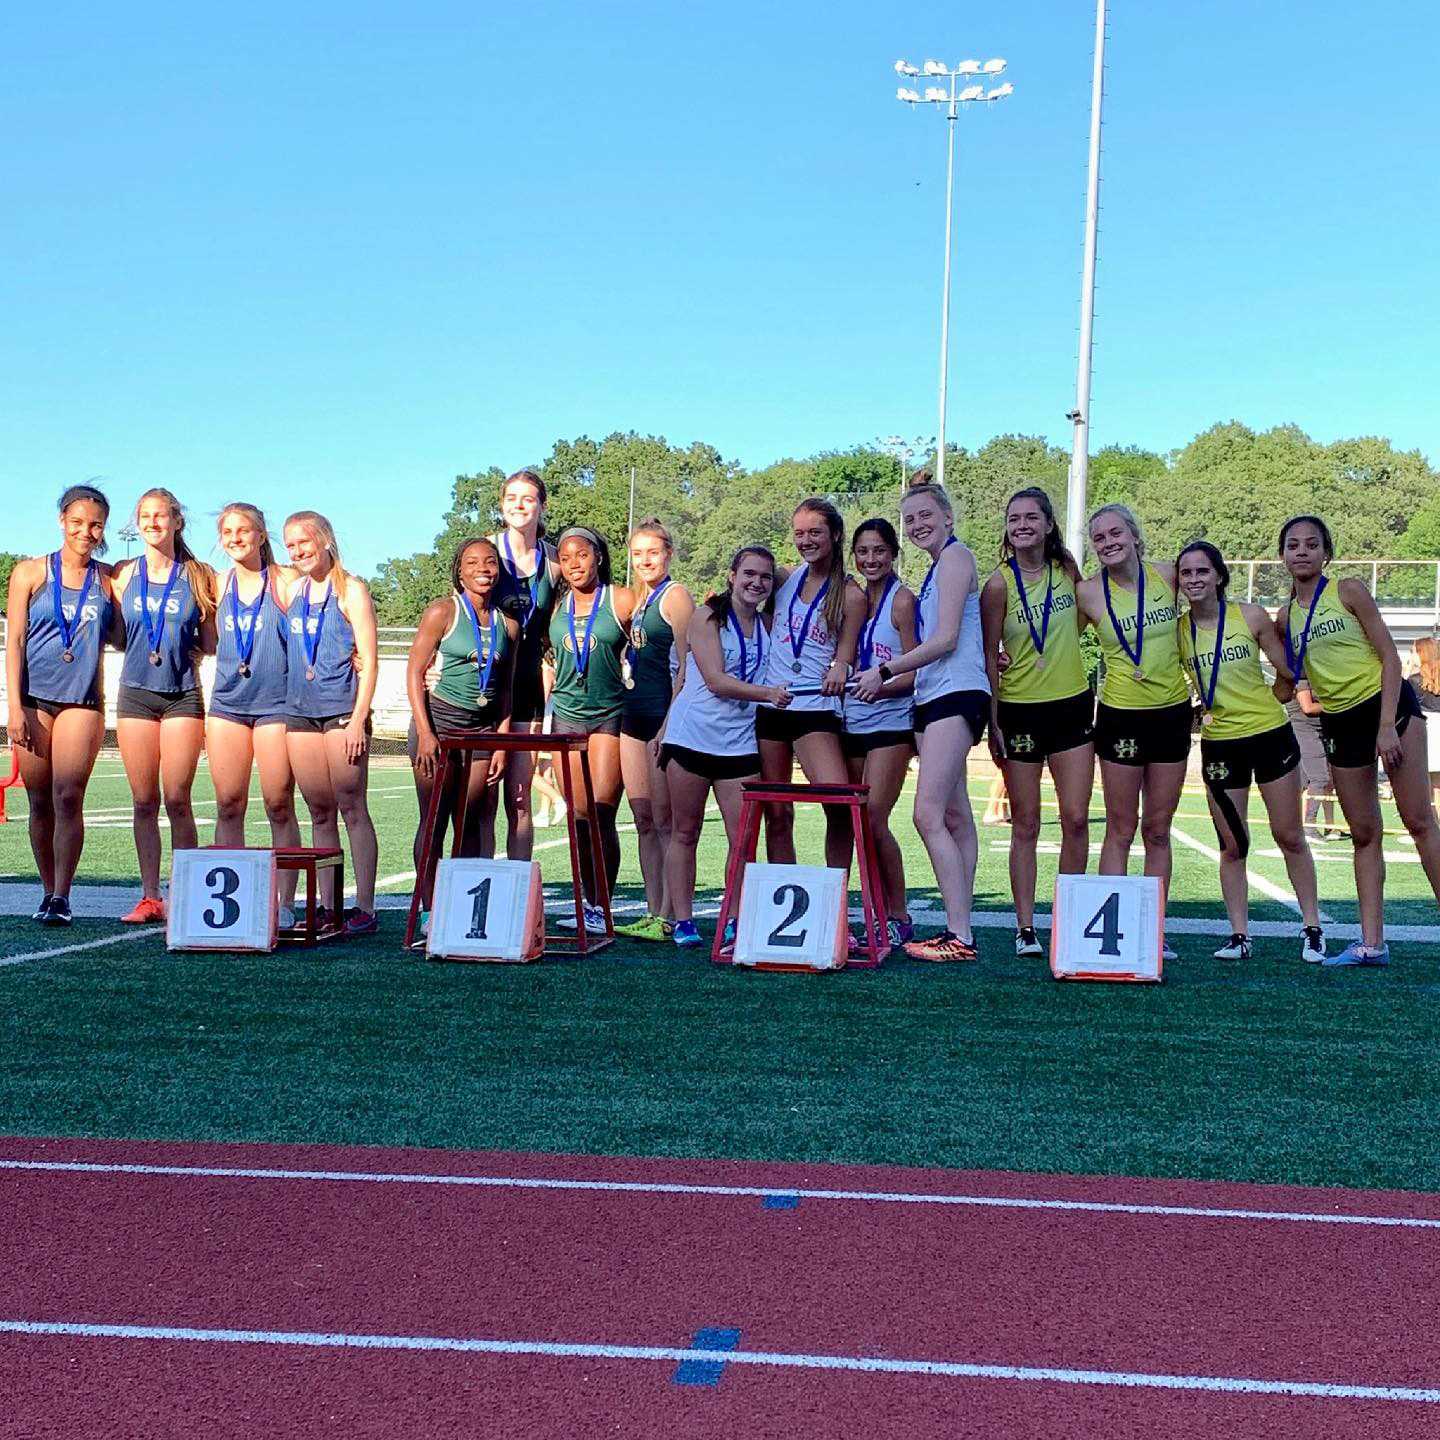 Stars Shine at Region Track Meet and Advance to State